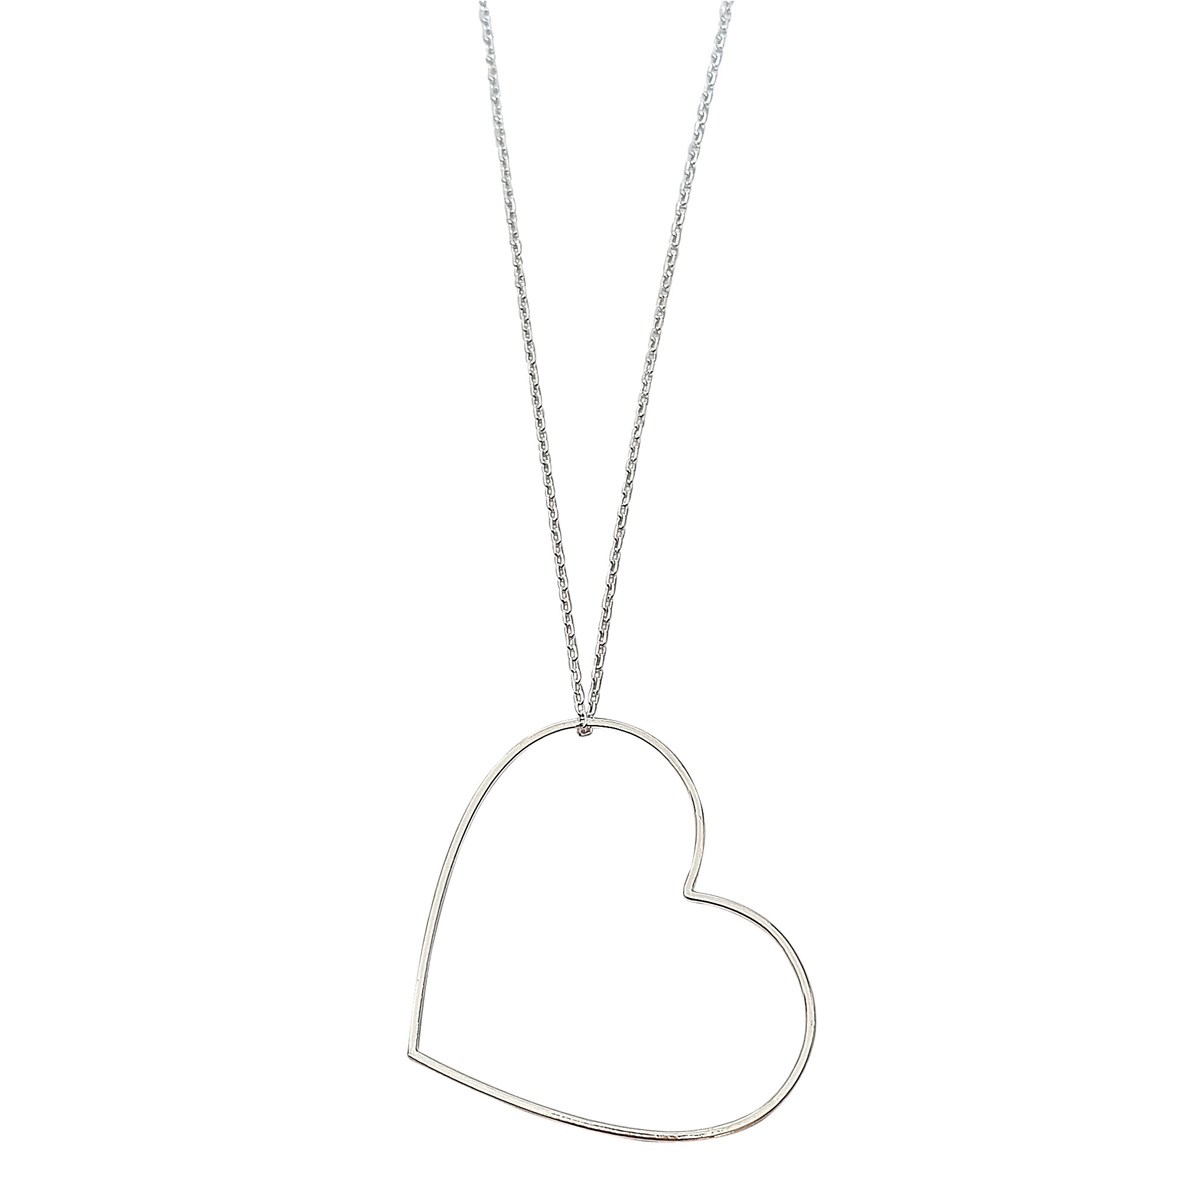 Collier Charly grand coeur argent 45 cm